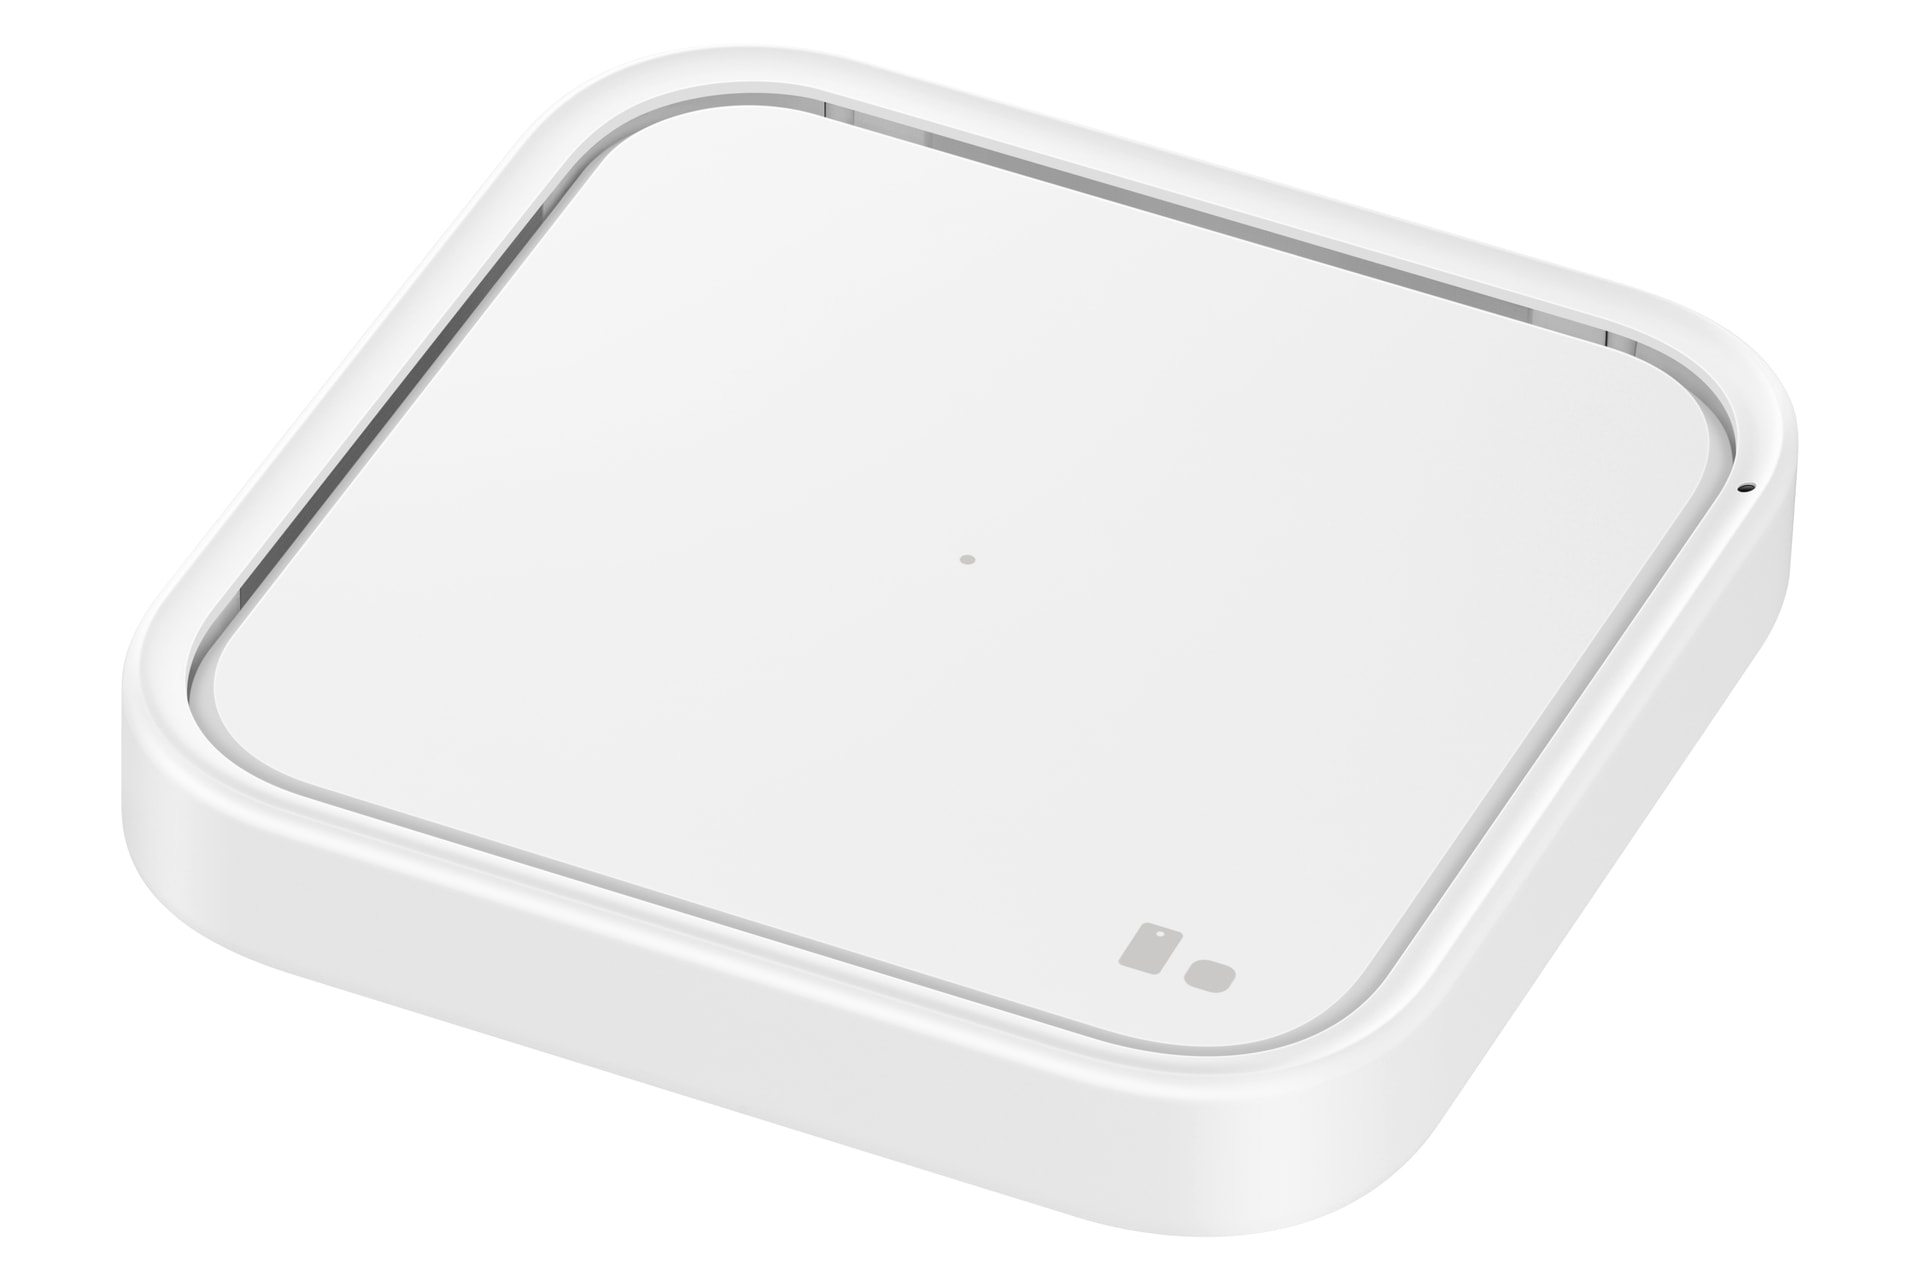 Induktions-Ladegerät »Wireless Charger Pad mit Adapter EP-P2400T«